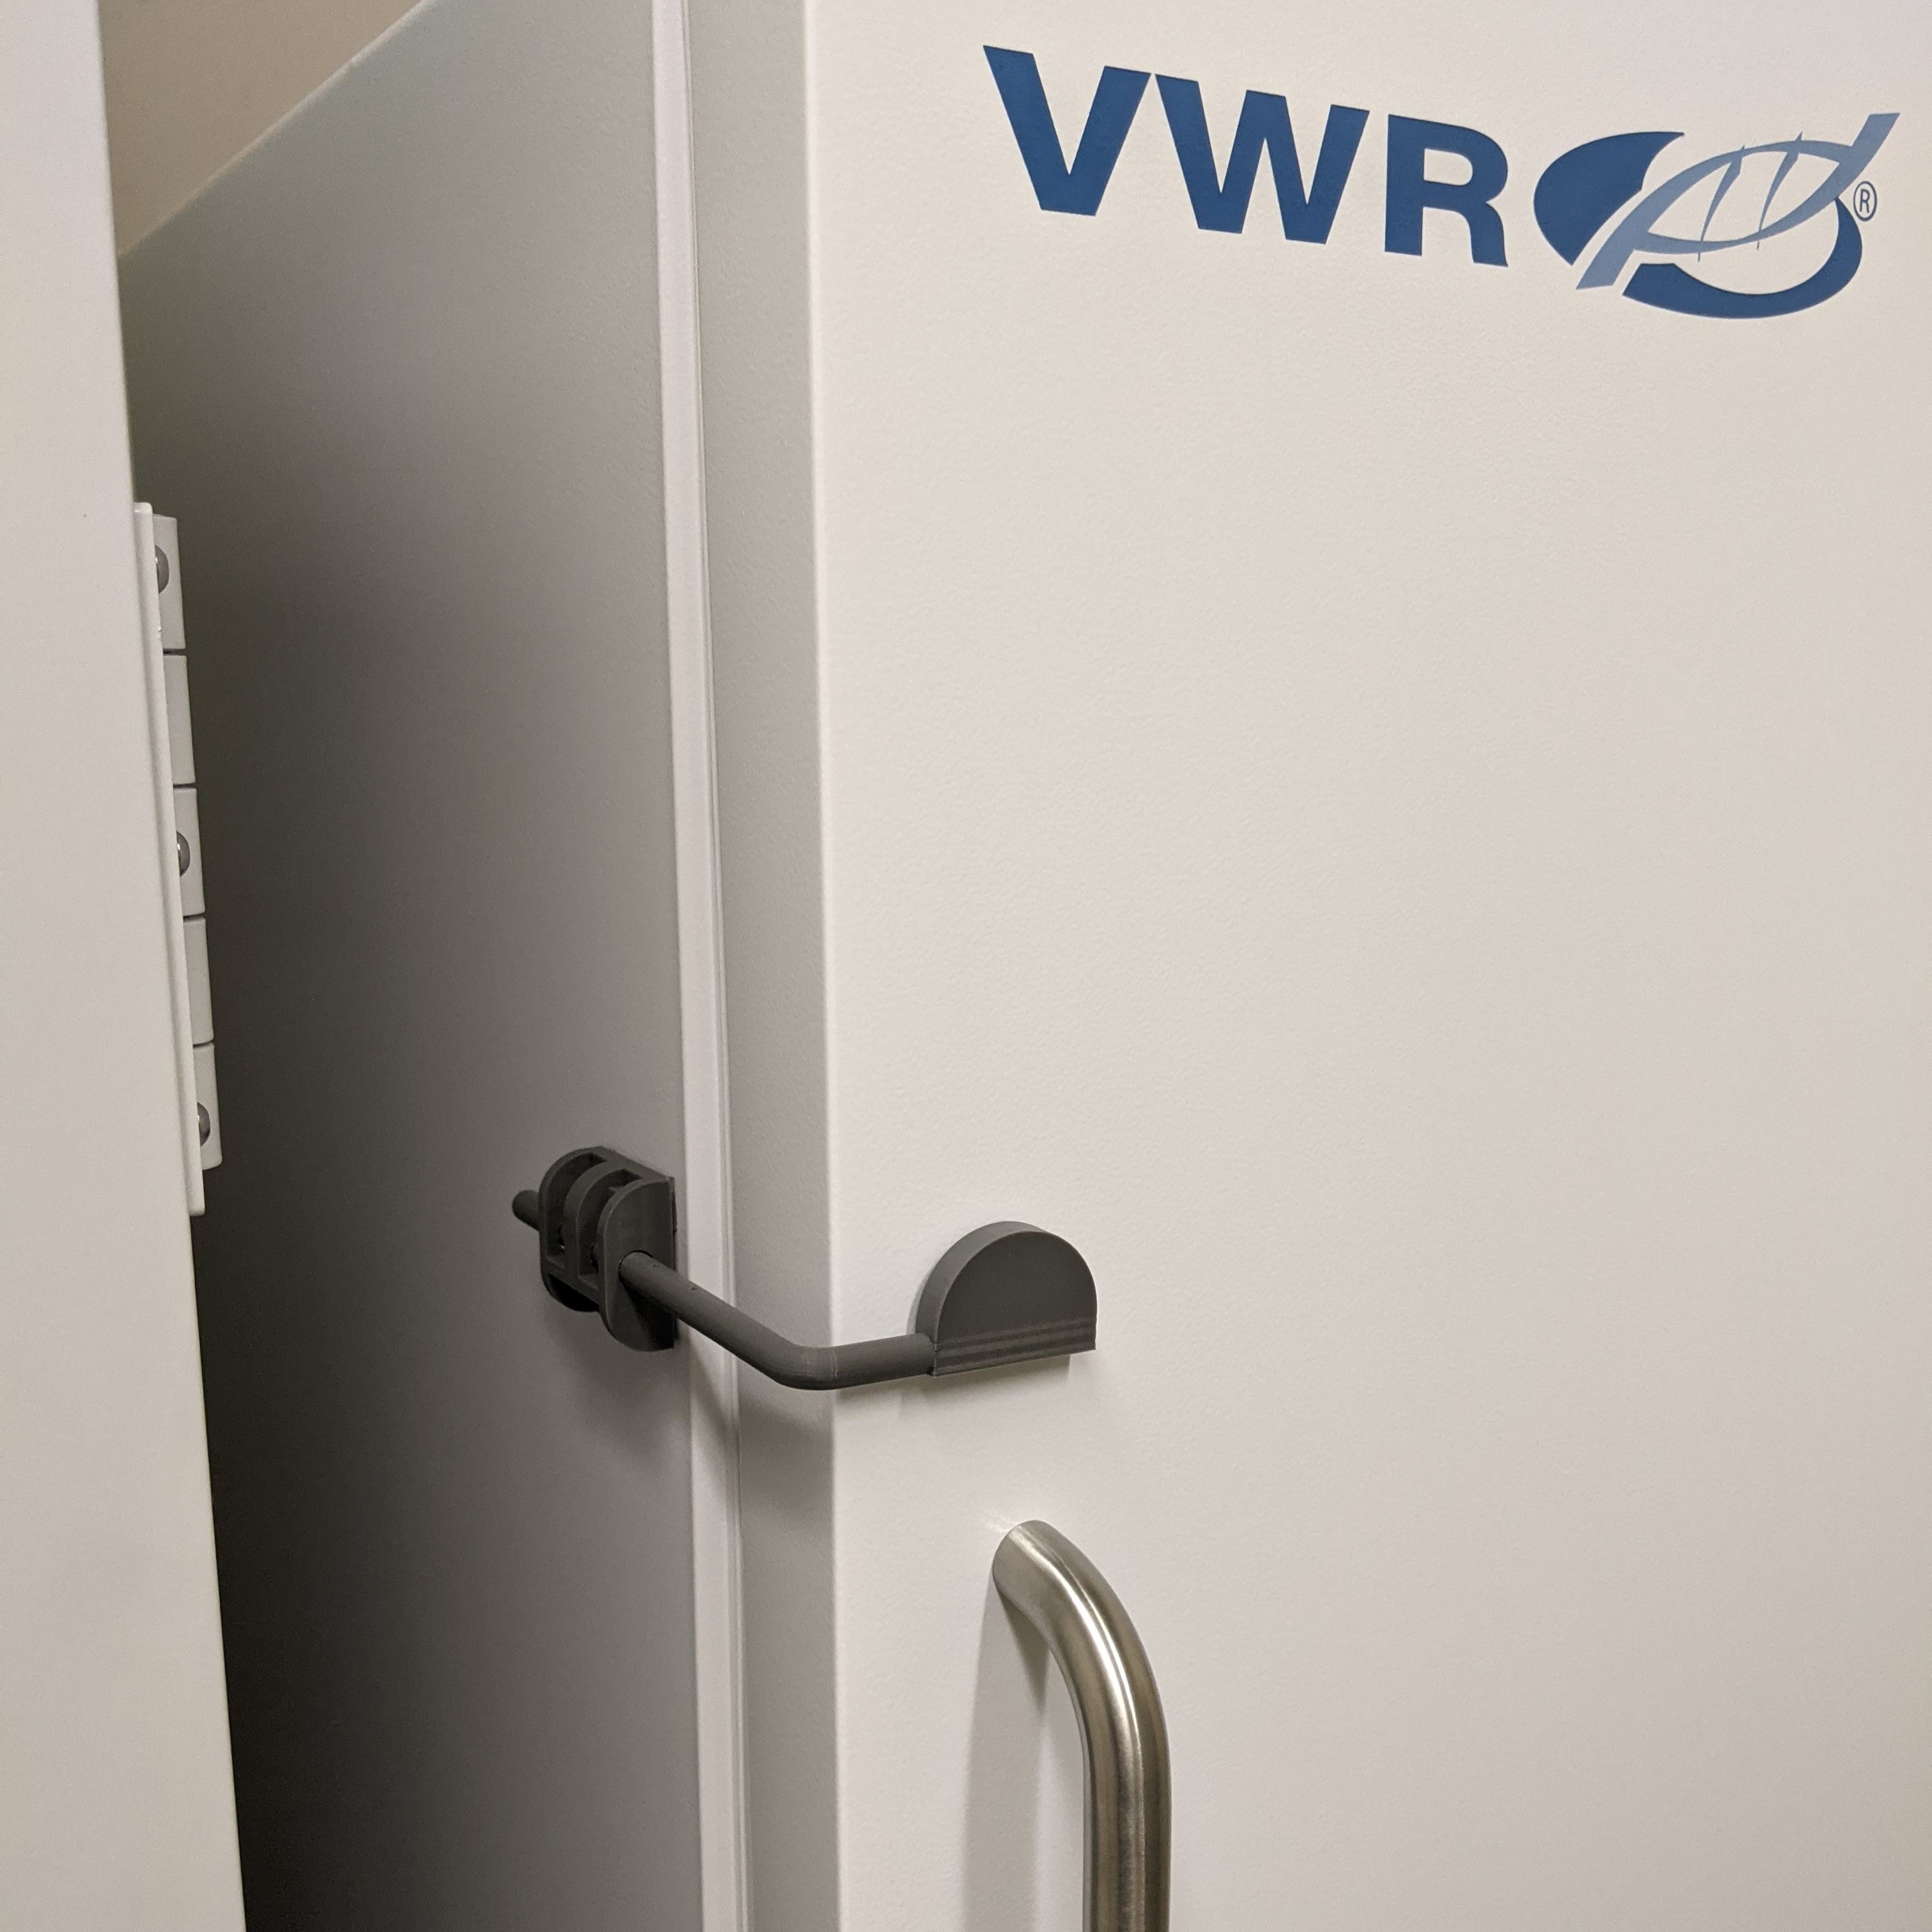 The door lock can be used on freezers to ensure the door is properly closed